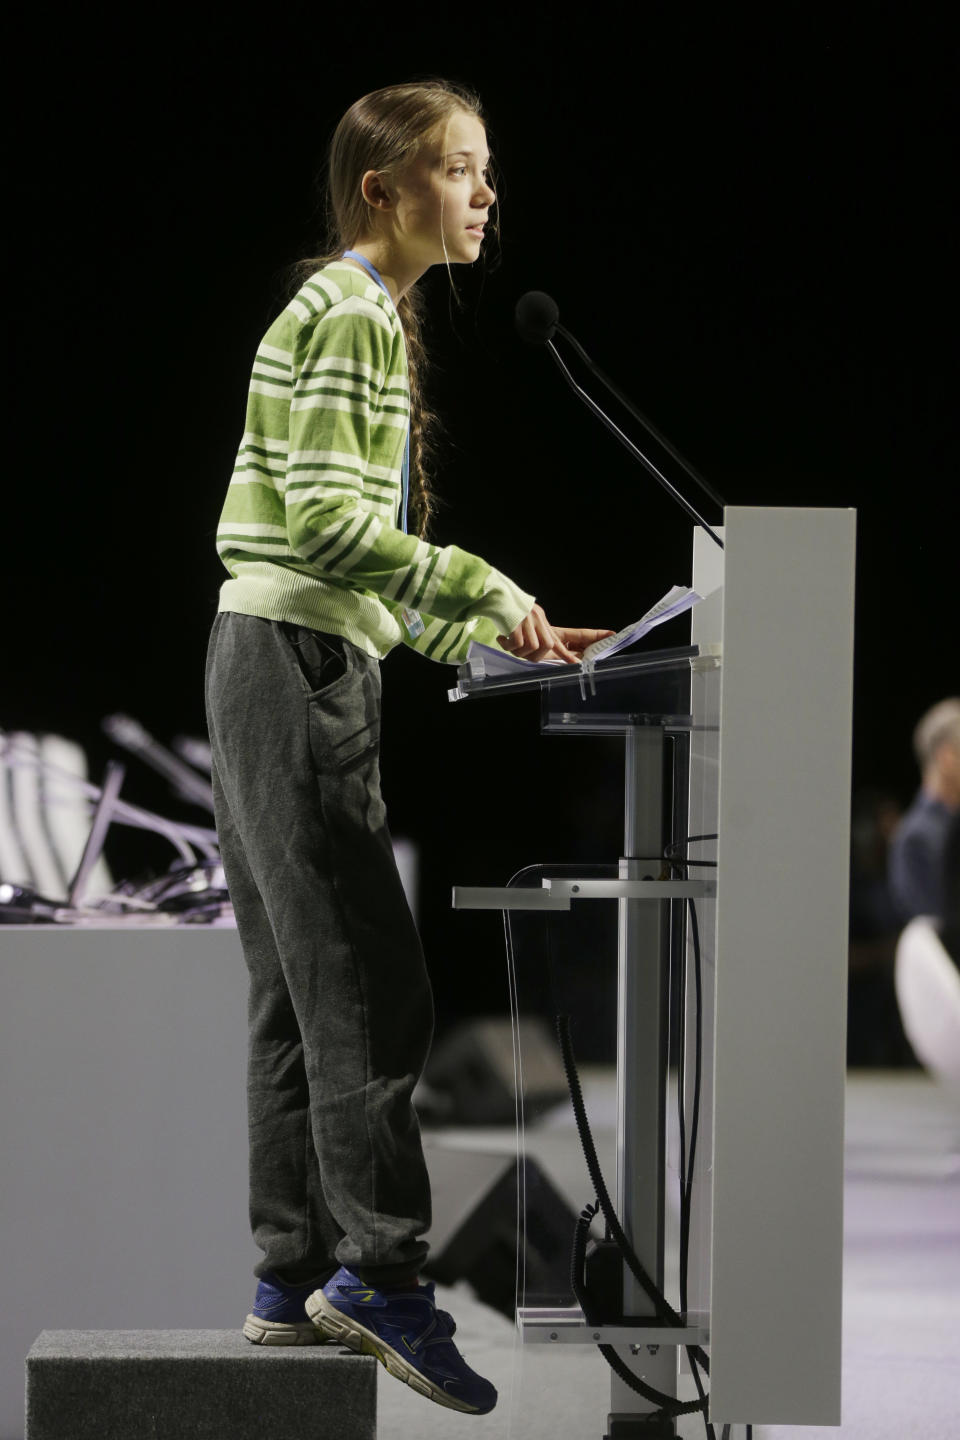 Swedish climate activist Greta Thunberg addresses plenary of U.N. climate conference during with a meeting with leading climate scientists at the COP25 summit in Madrid, Spain, Wednesday, Dec. 11, 2019. Thunberg is in Madrid where a global U.N.-sponsored climate change conference is taking place. (AP Photo/Paul White)